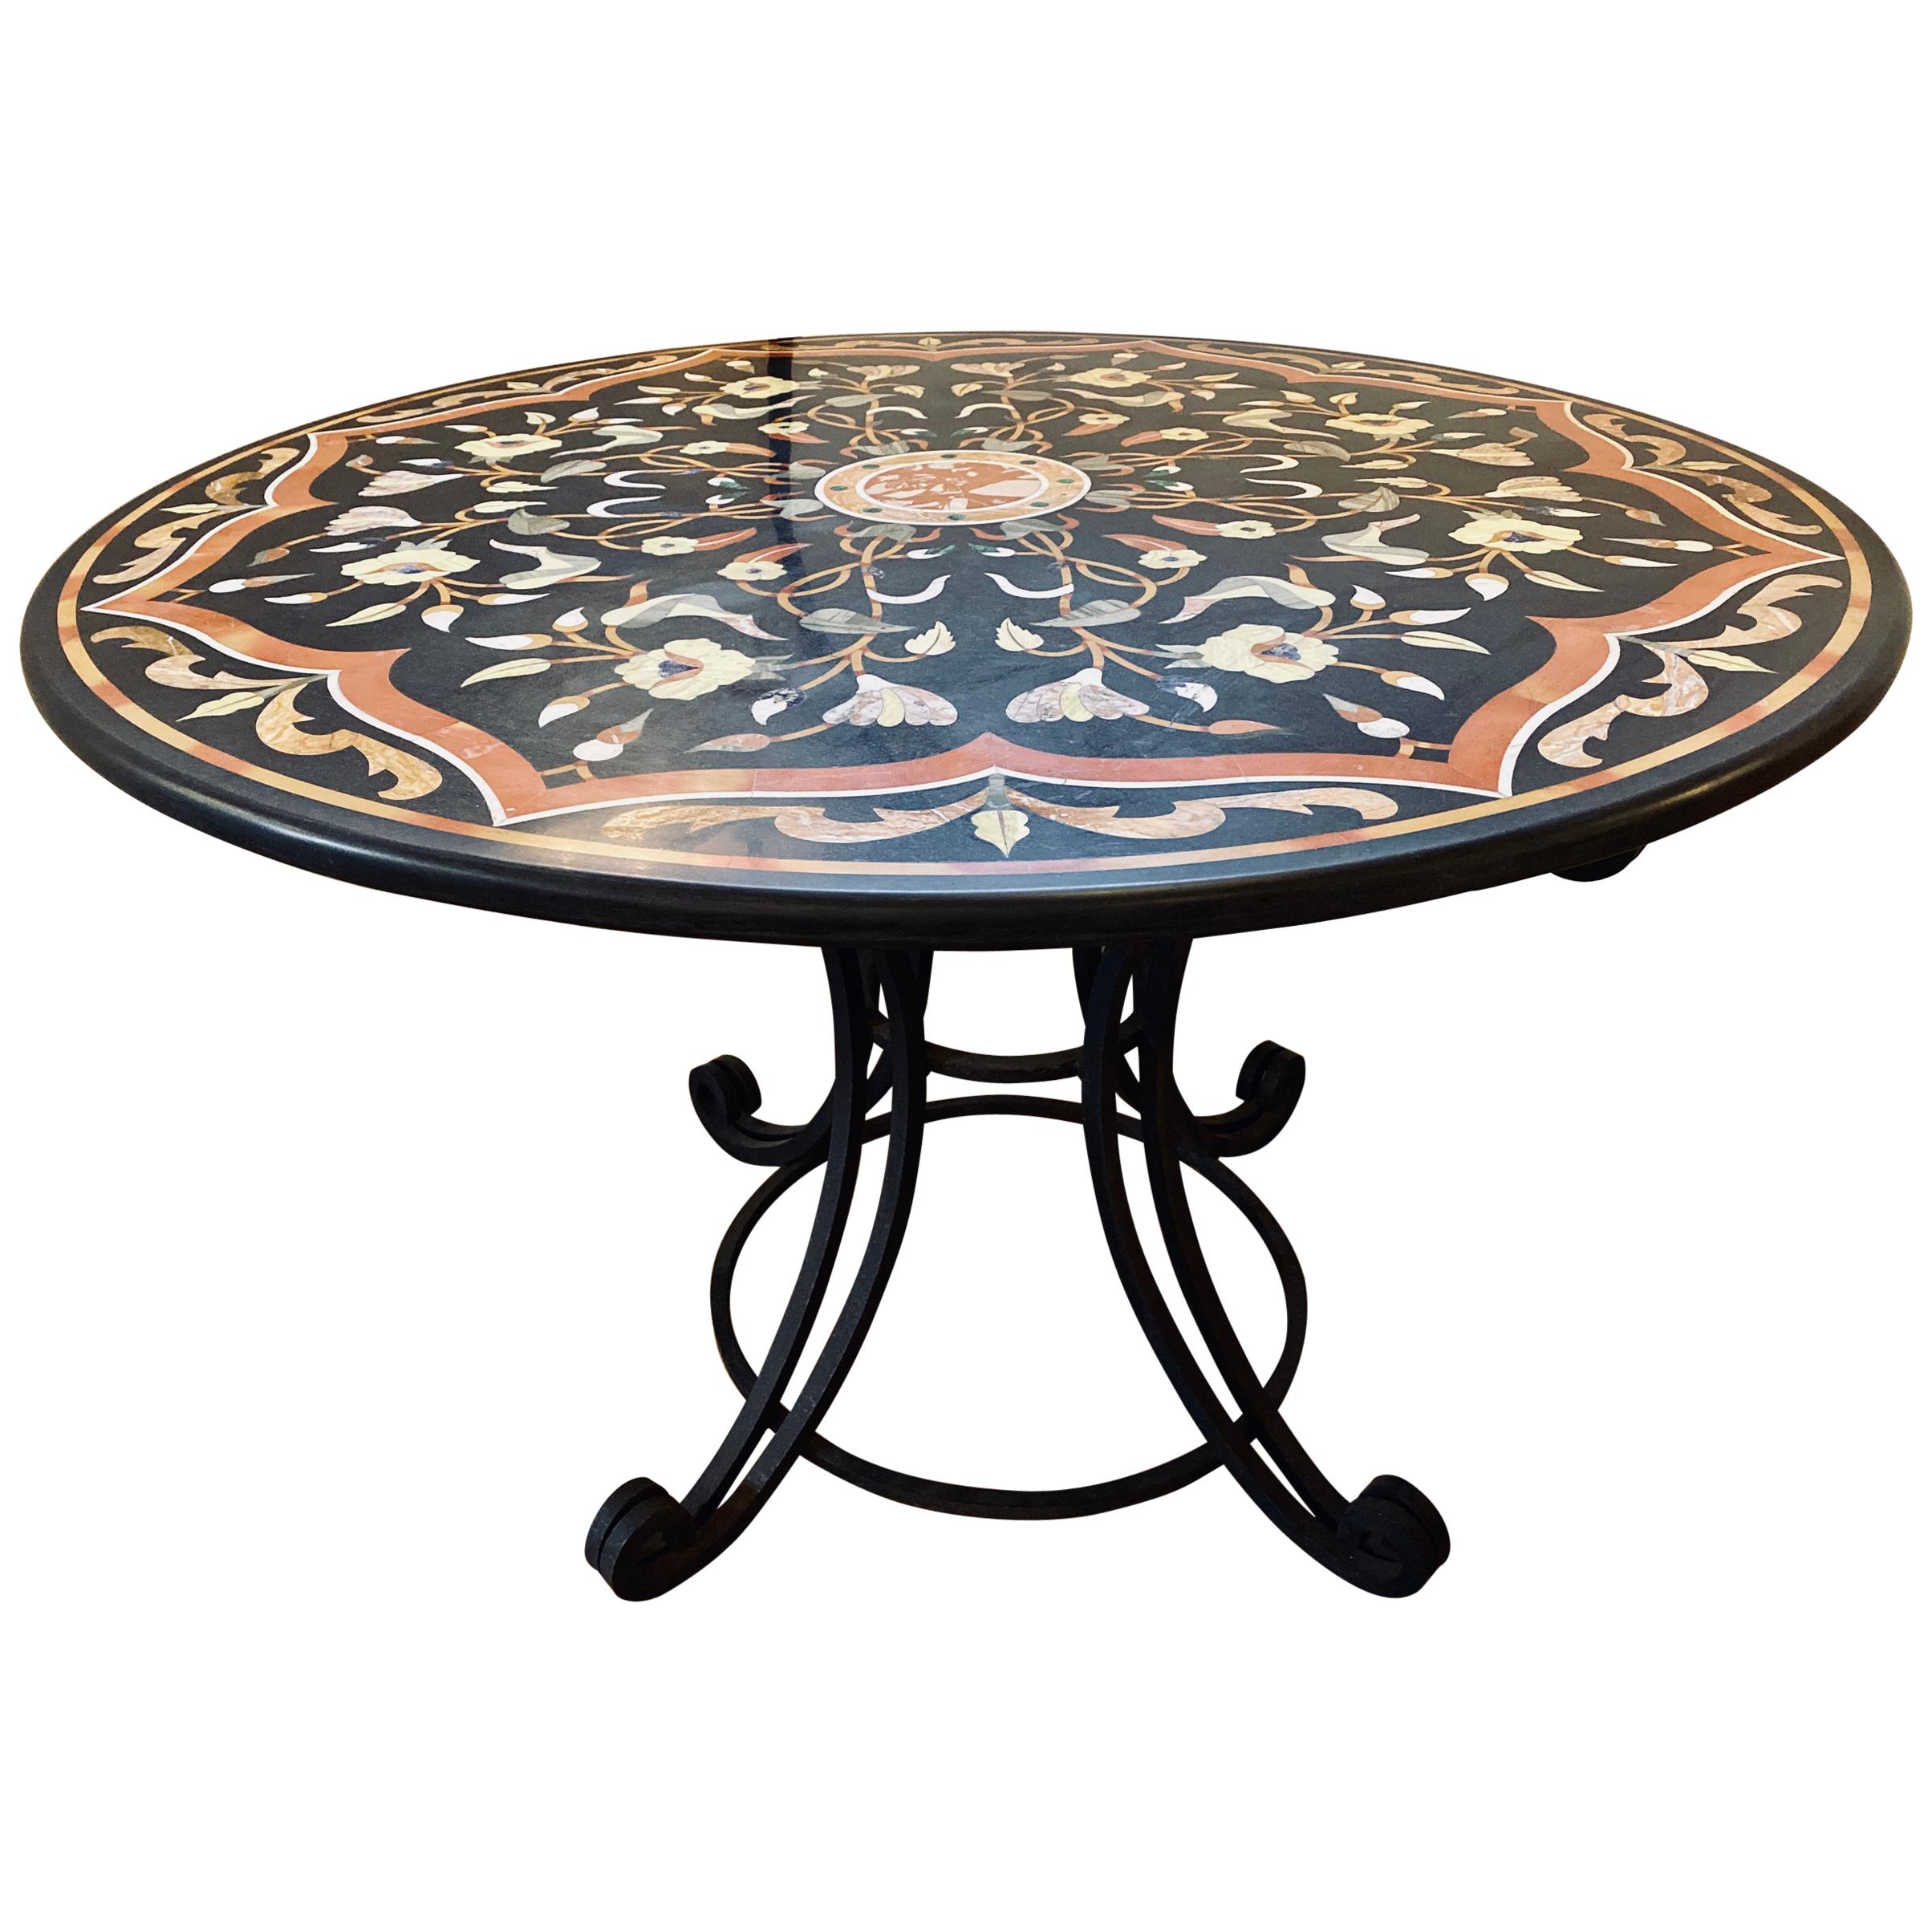 Pietra Dura Stone Inlaid Round Center Dining Table, Wrought Iron Base Antique